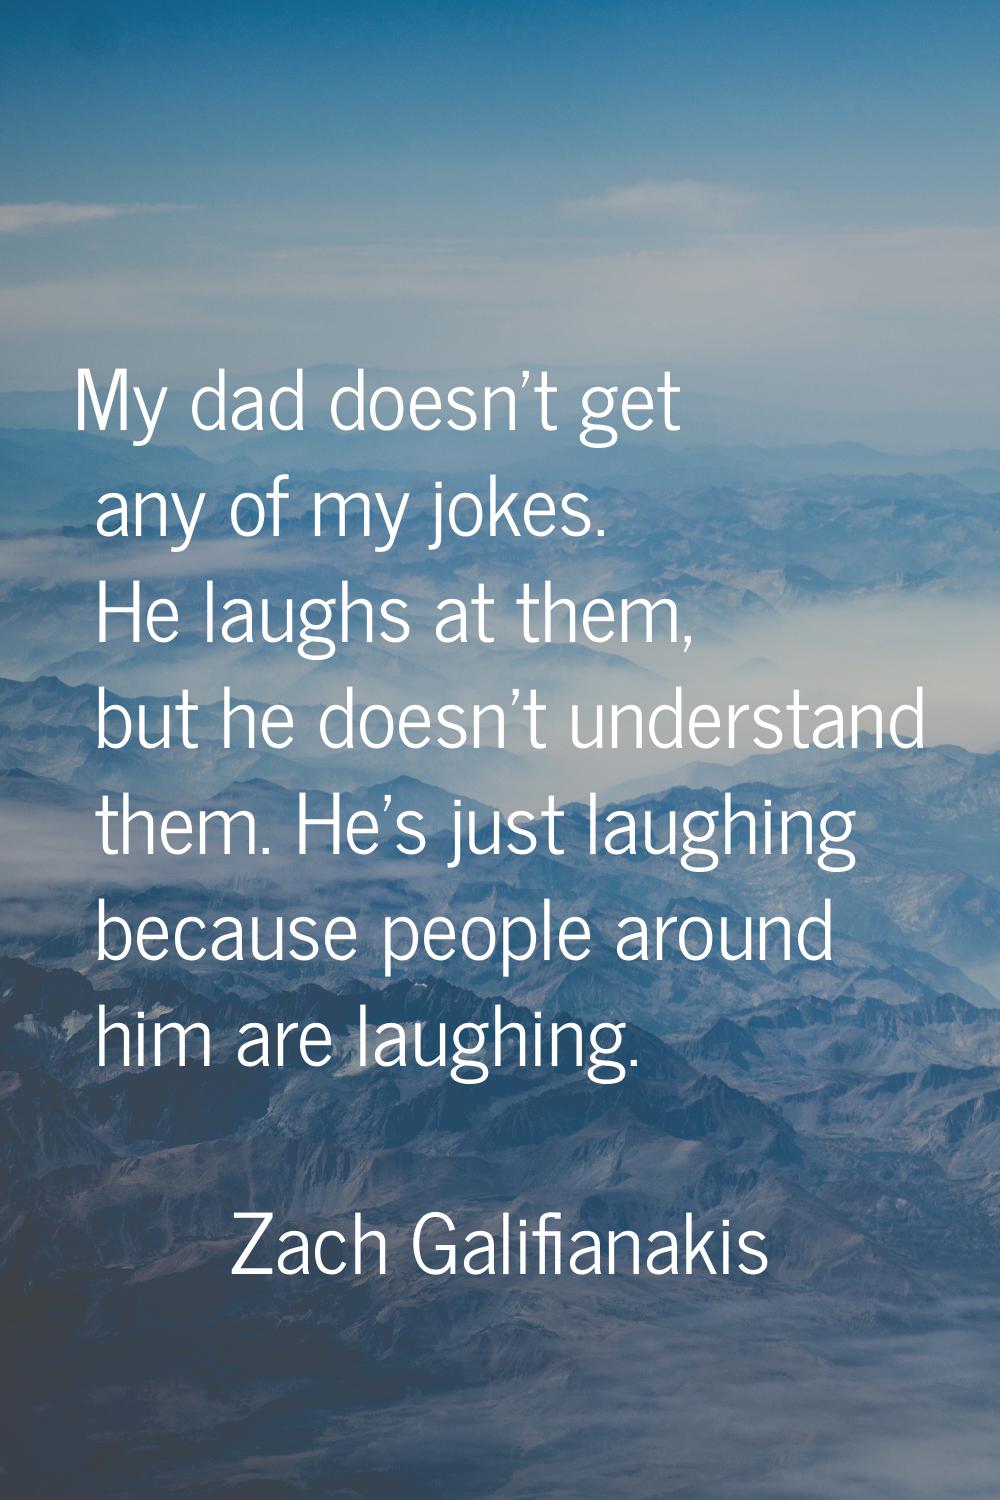 My dad doesn't get any of my jokes. He laughs at them, but he doesn't understand them. He's just la